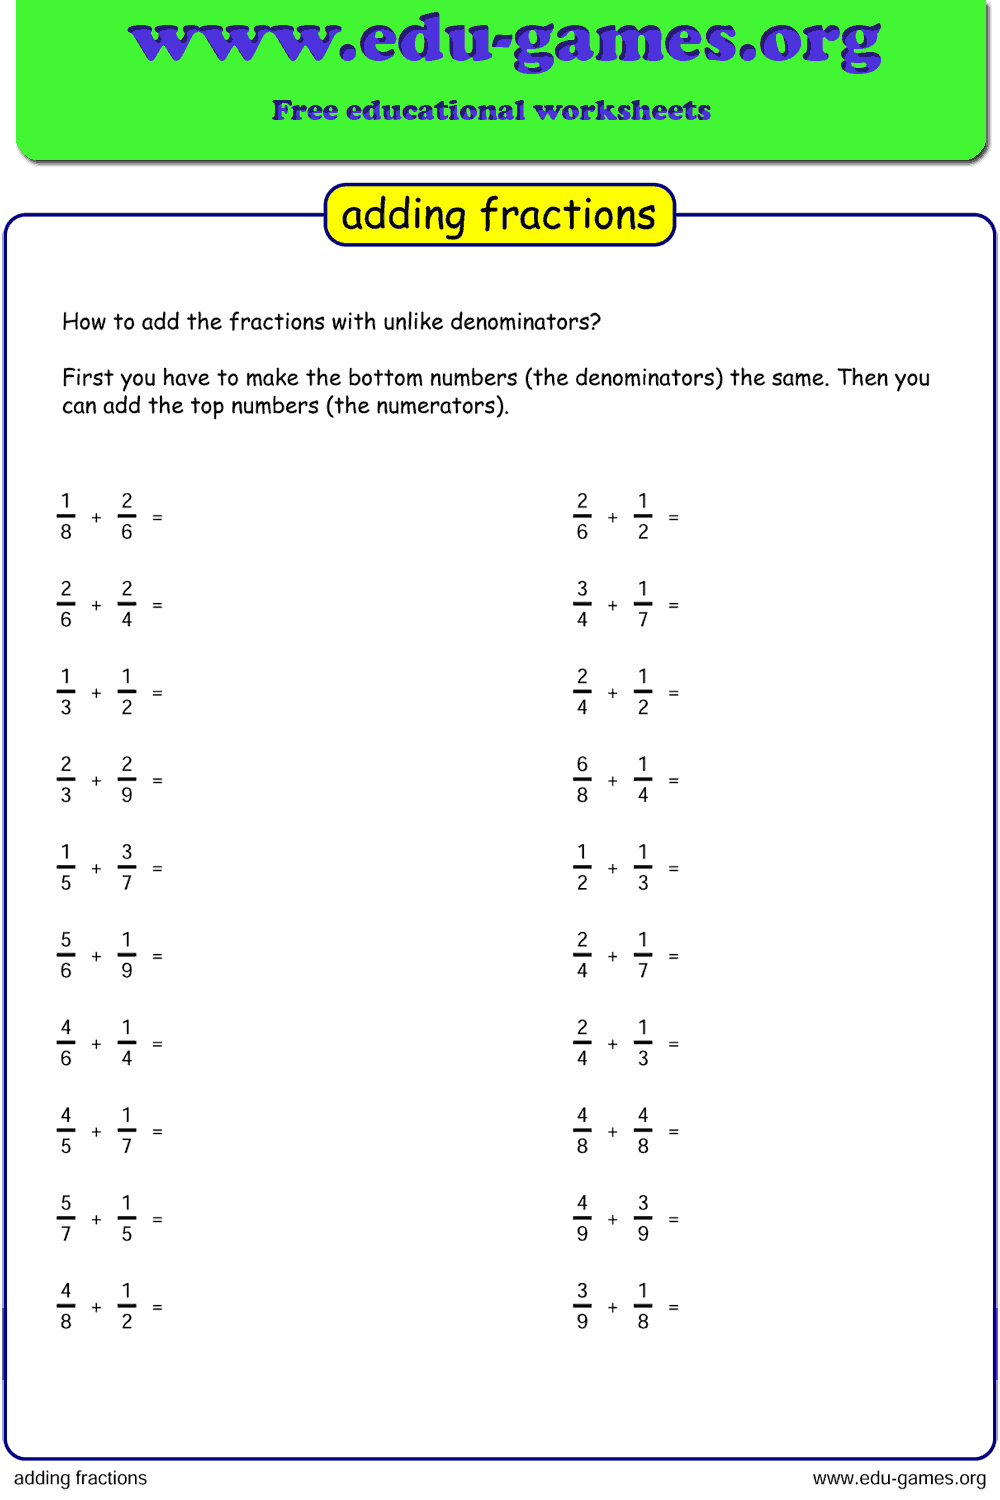 how-to-add-fractions-with-whole-numbers-and-unlike-denominators-adding-and-subtracting